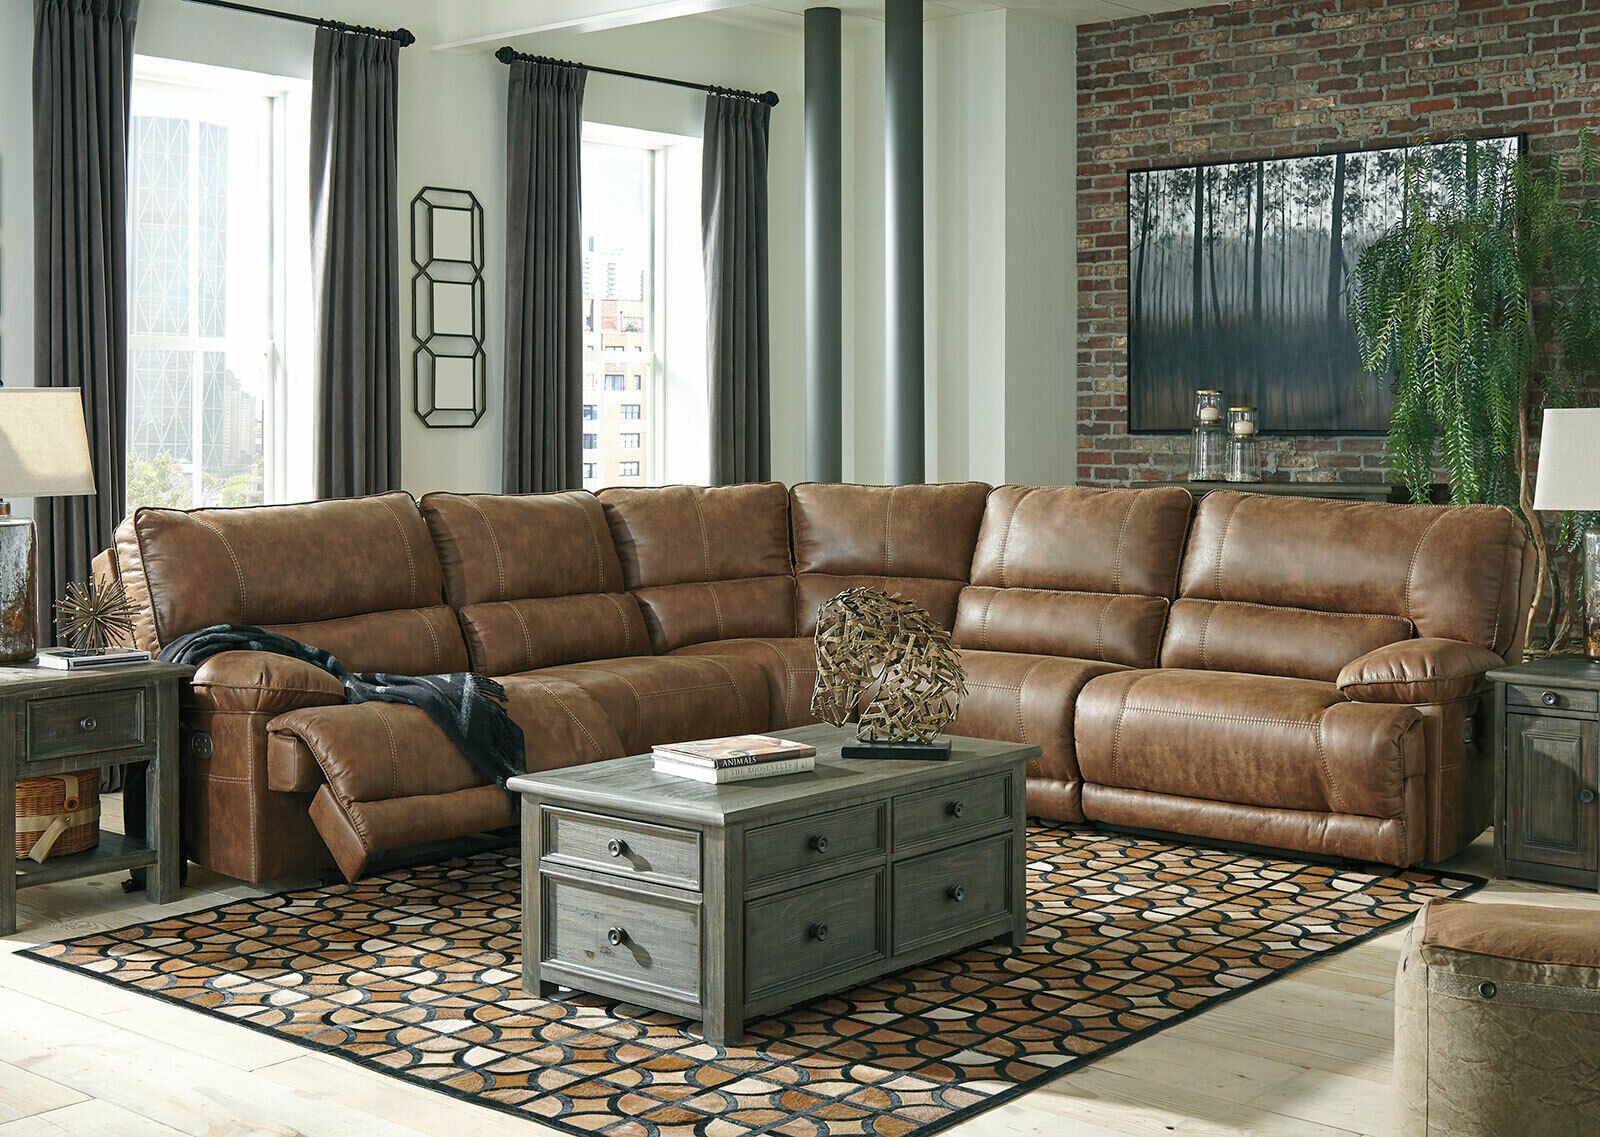 Faux Leather Reclining Couches – Damiano Faux Leather Reclining Sofa With Faux Leather Sofas In Dark Brown (Gallery 10 of 20)